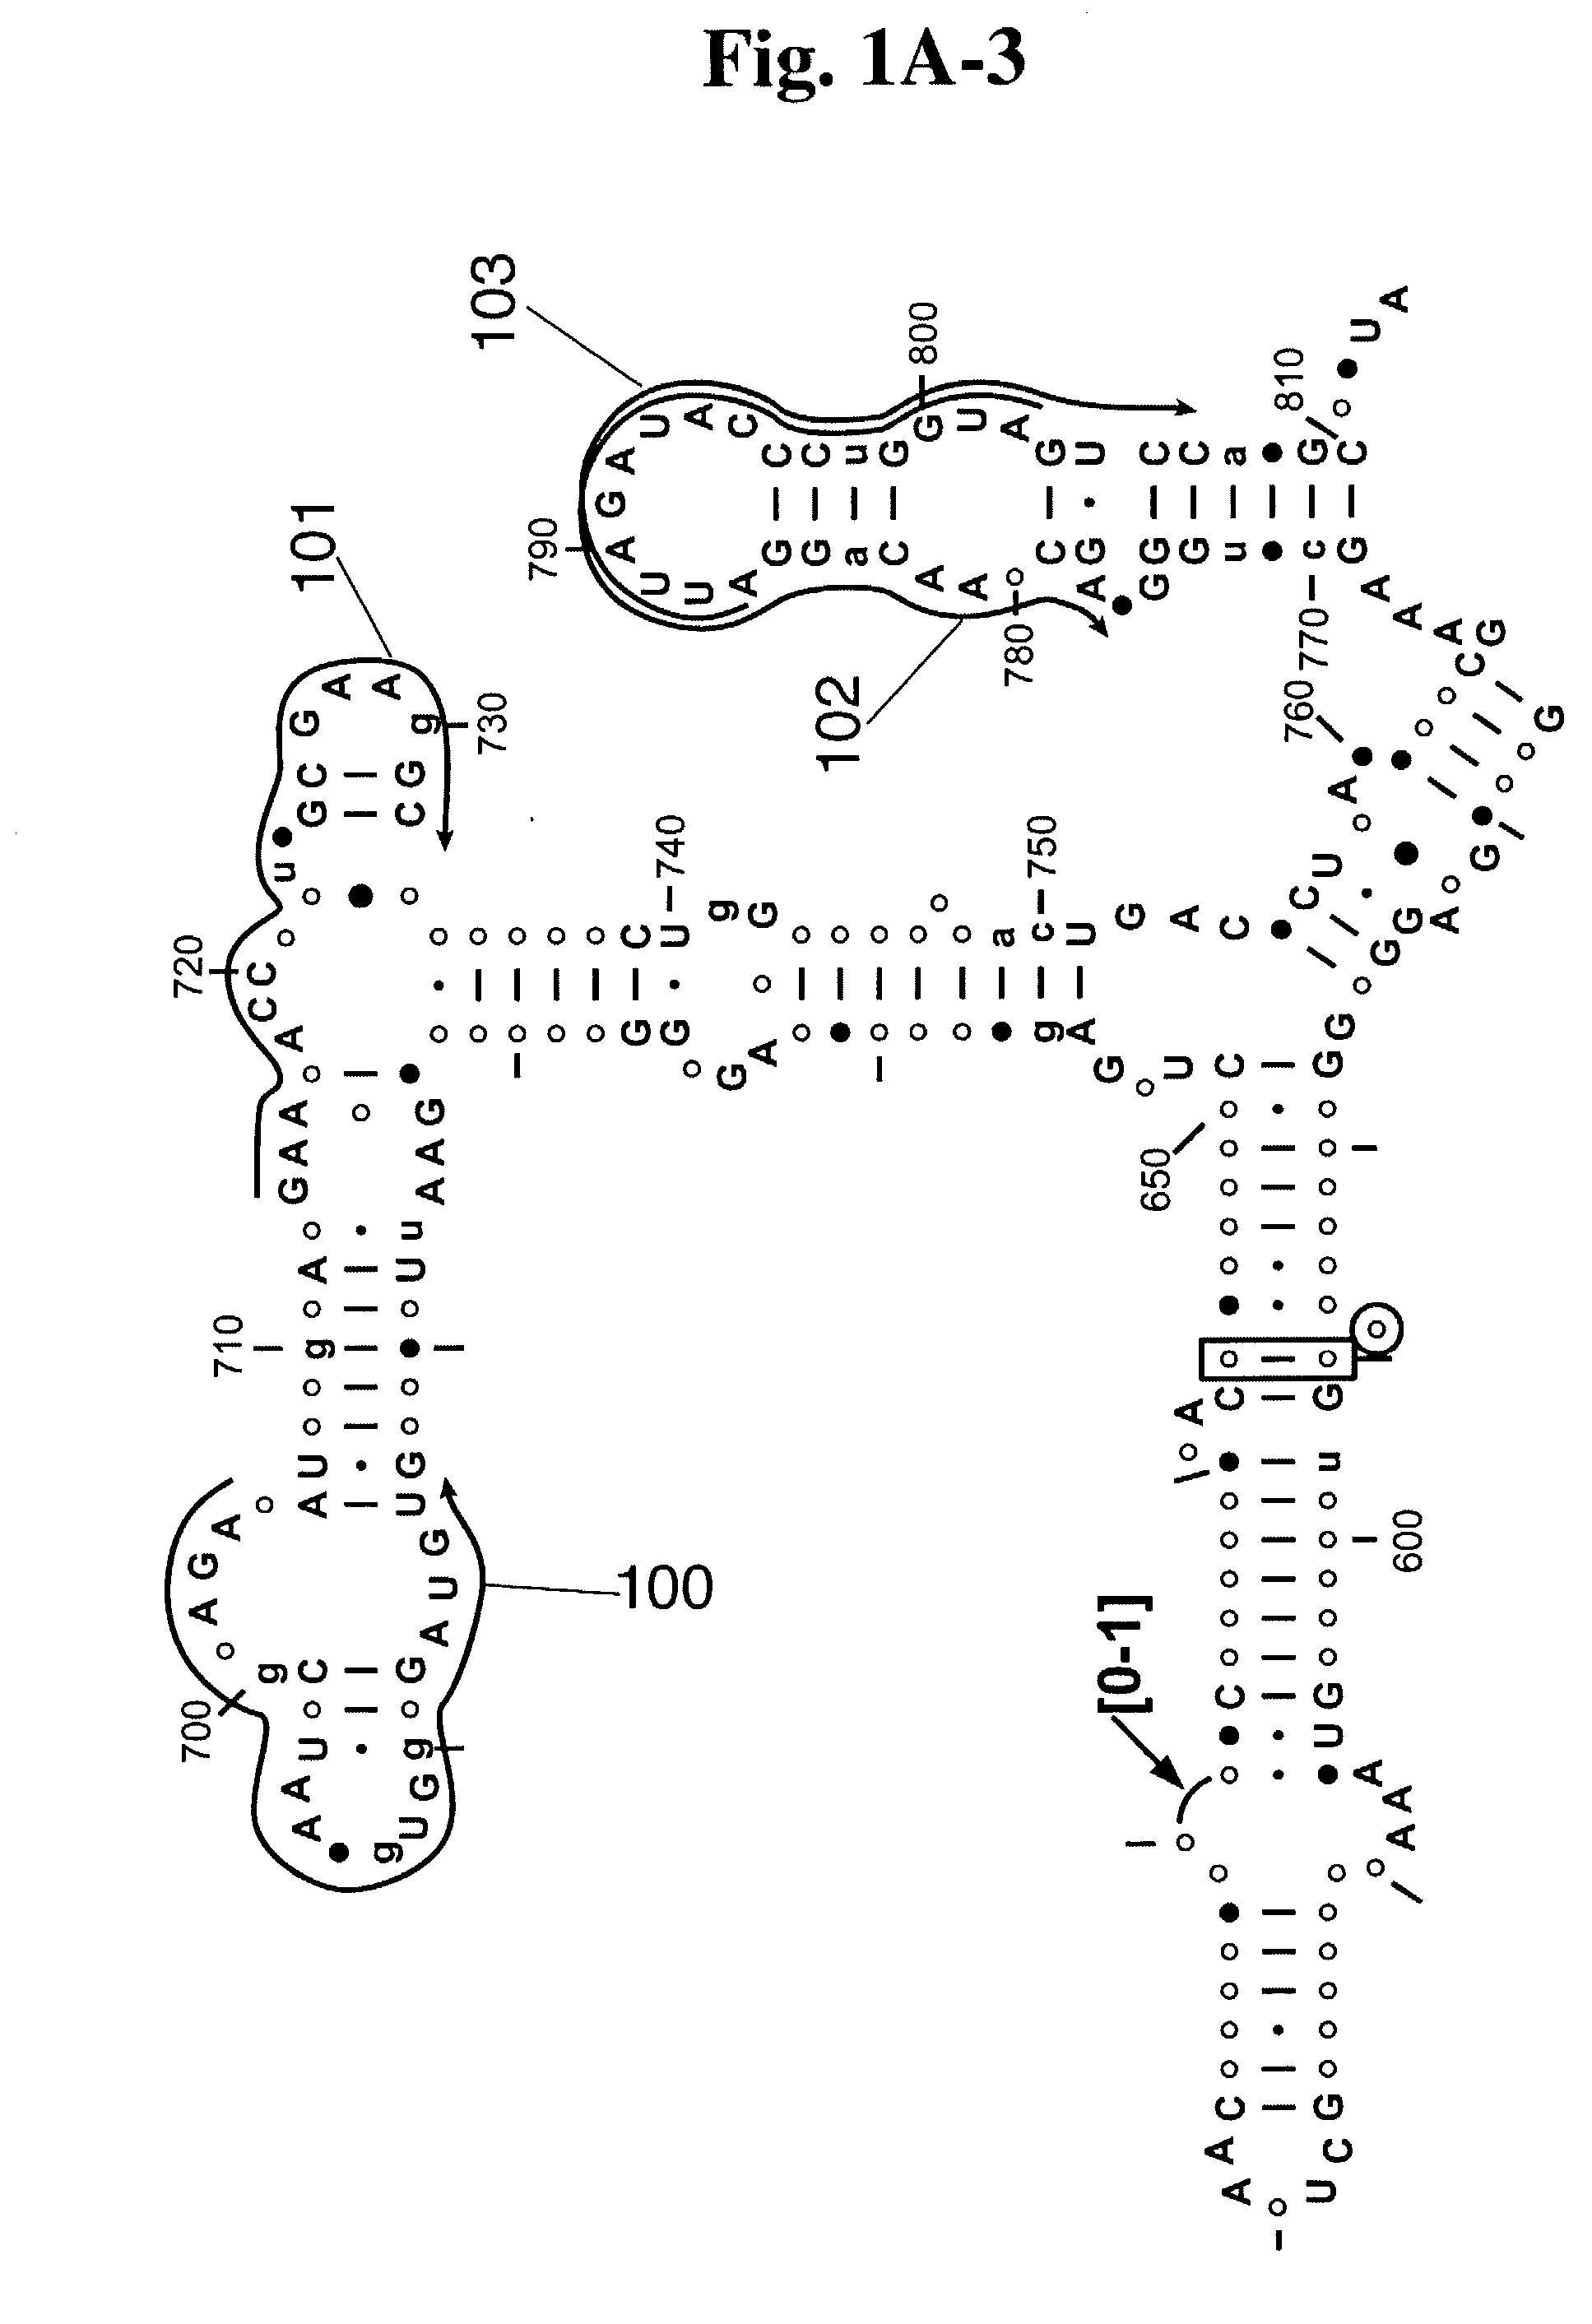 Methods for providing bacterial bioagent characterizing information